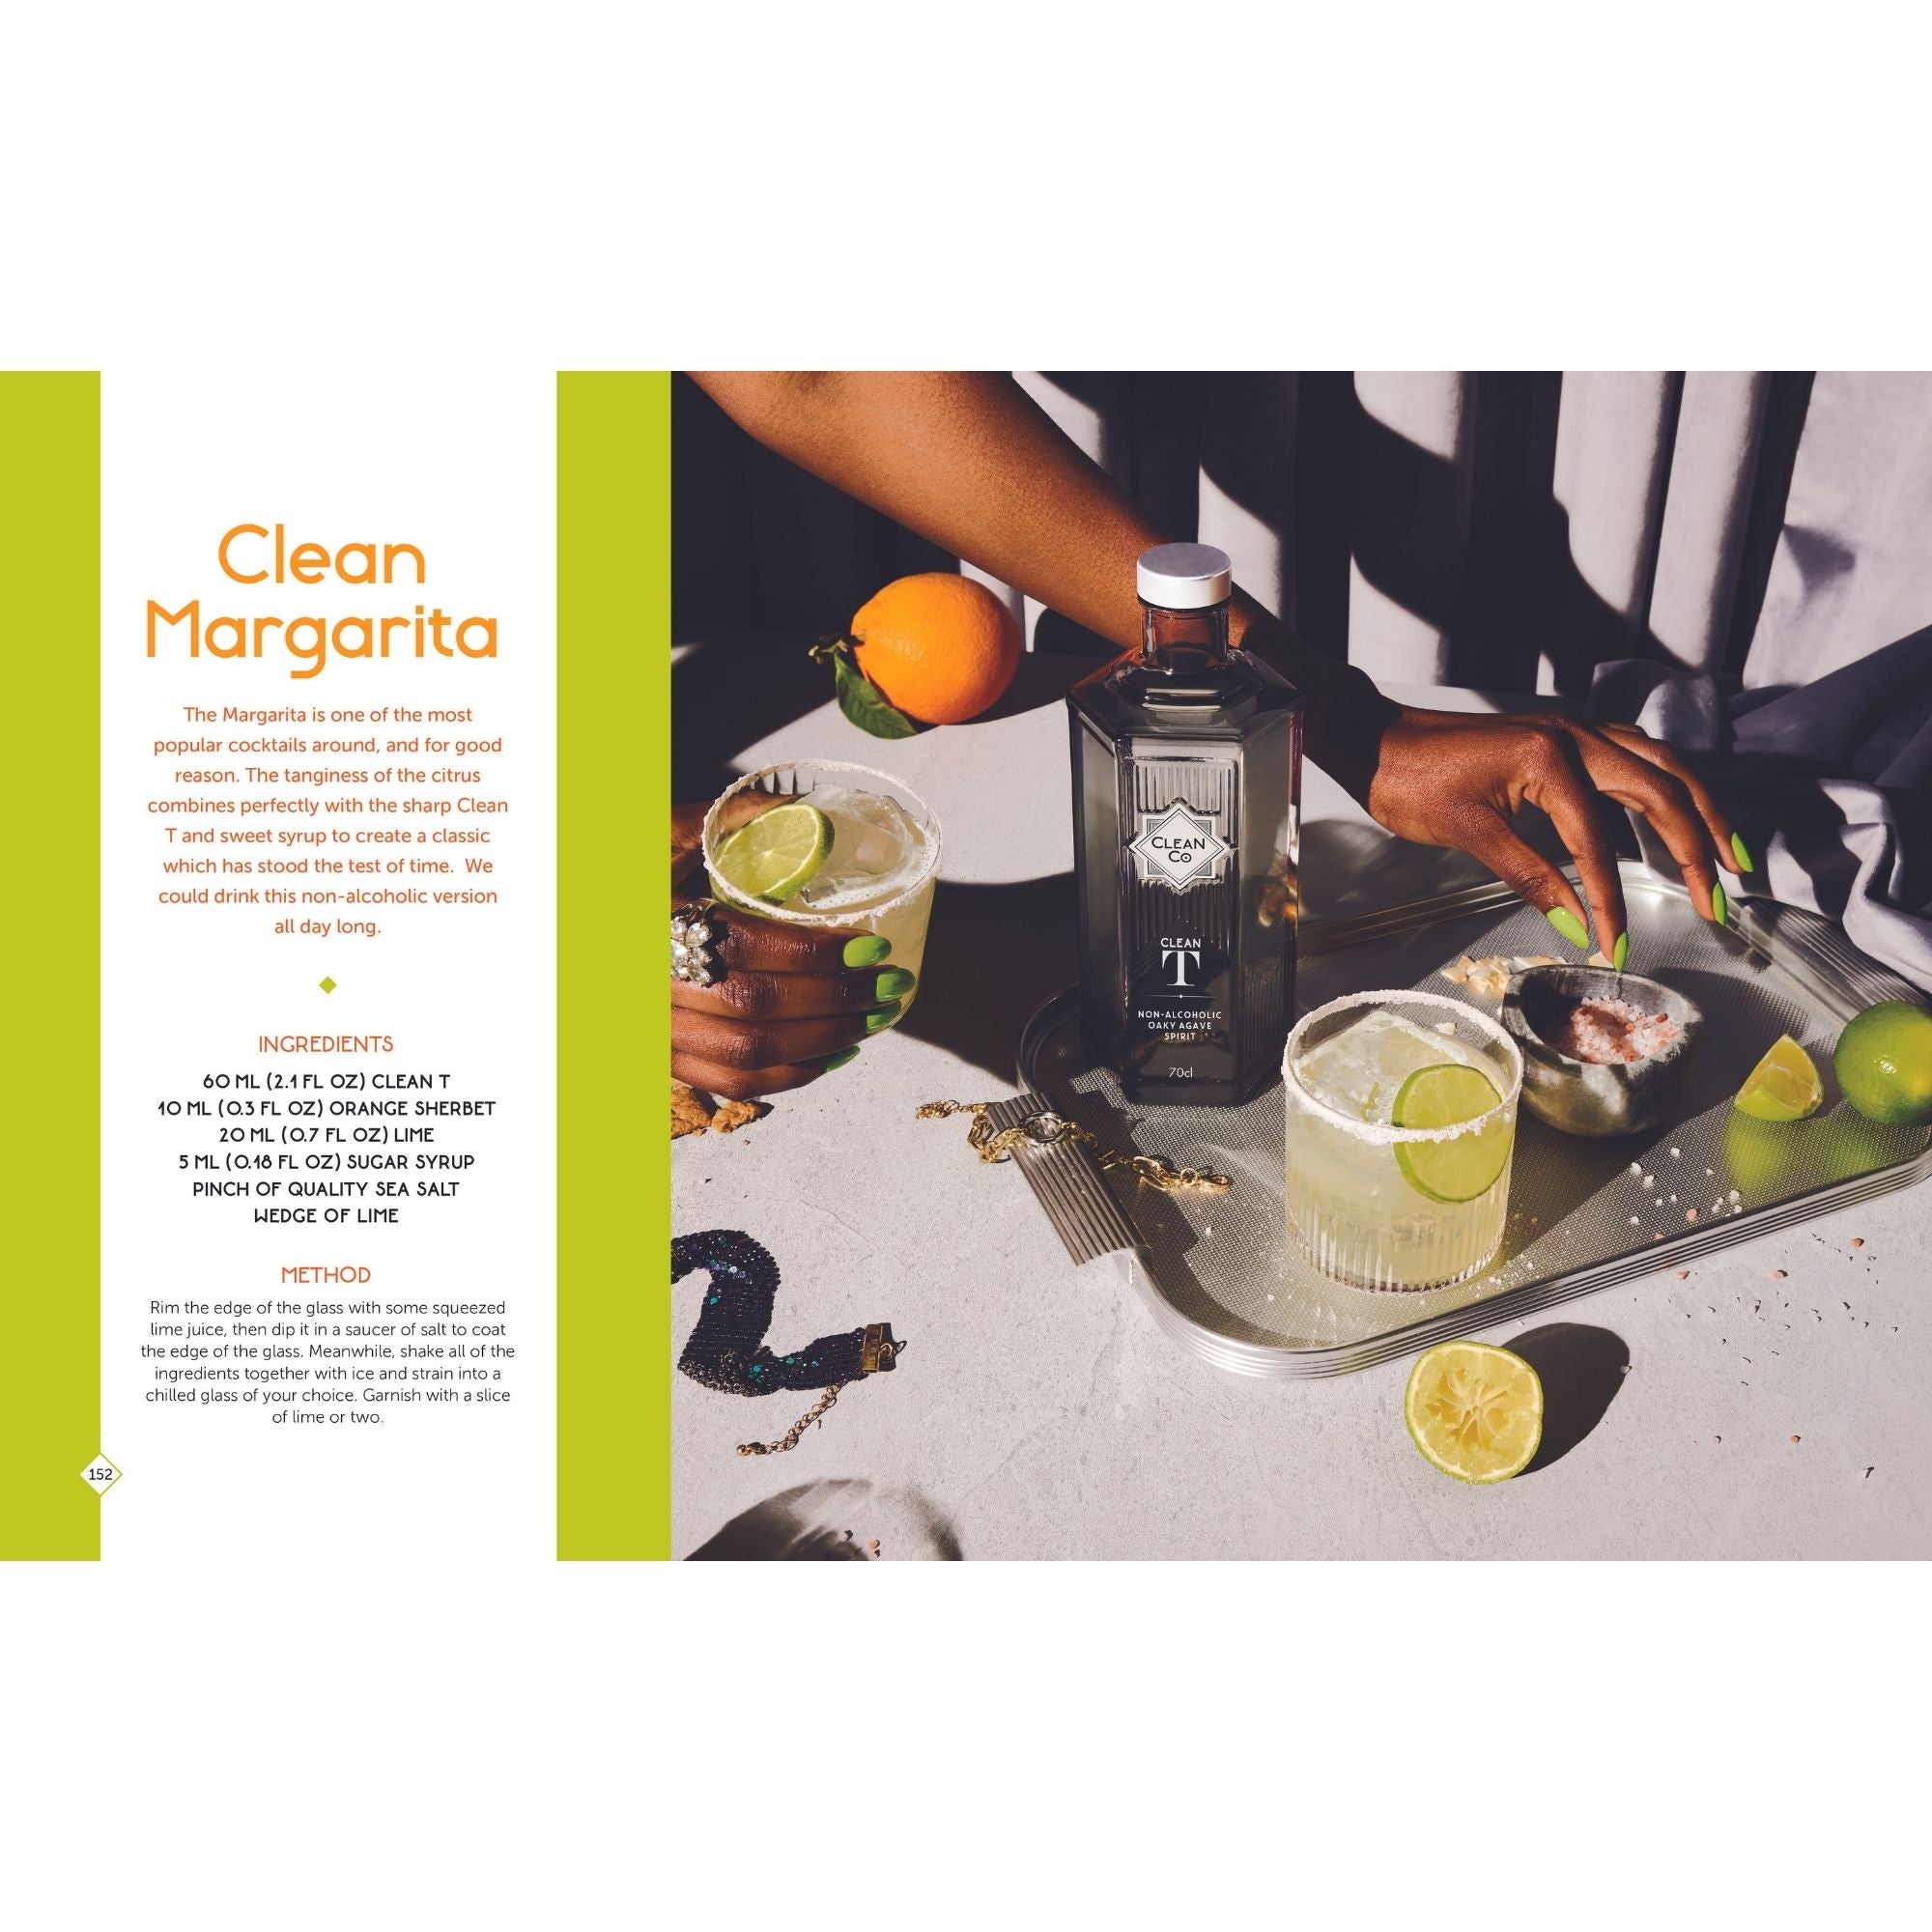 CleanCo Cocktail recipe book showing how to make Clean Margaritas 